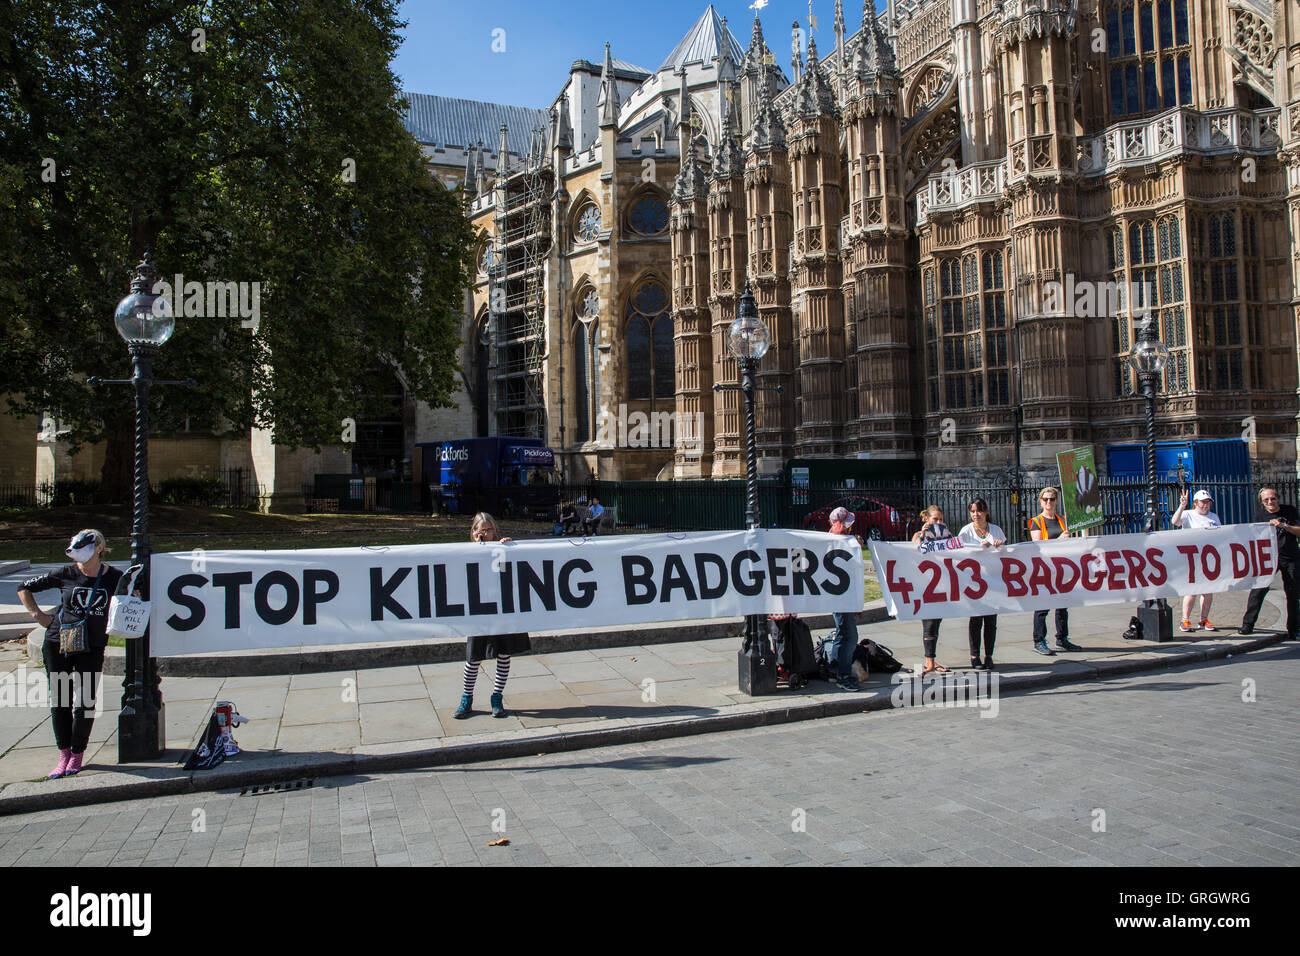 London, UK. 7th September, 2016. Animal rights campaigners protesting outside Parliament against the badger cull hold a banner indicating that 4,213 badgers will die during the cull. Credit:  Mark Kerrison/Alamy Live News Stock Photo